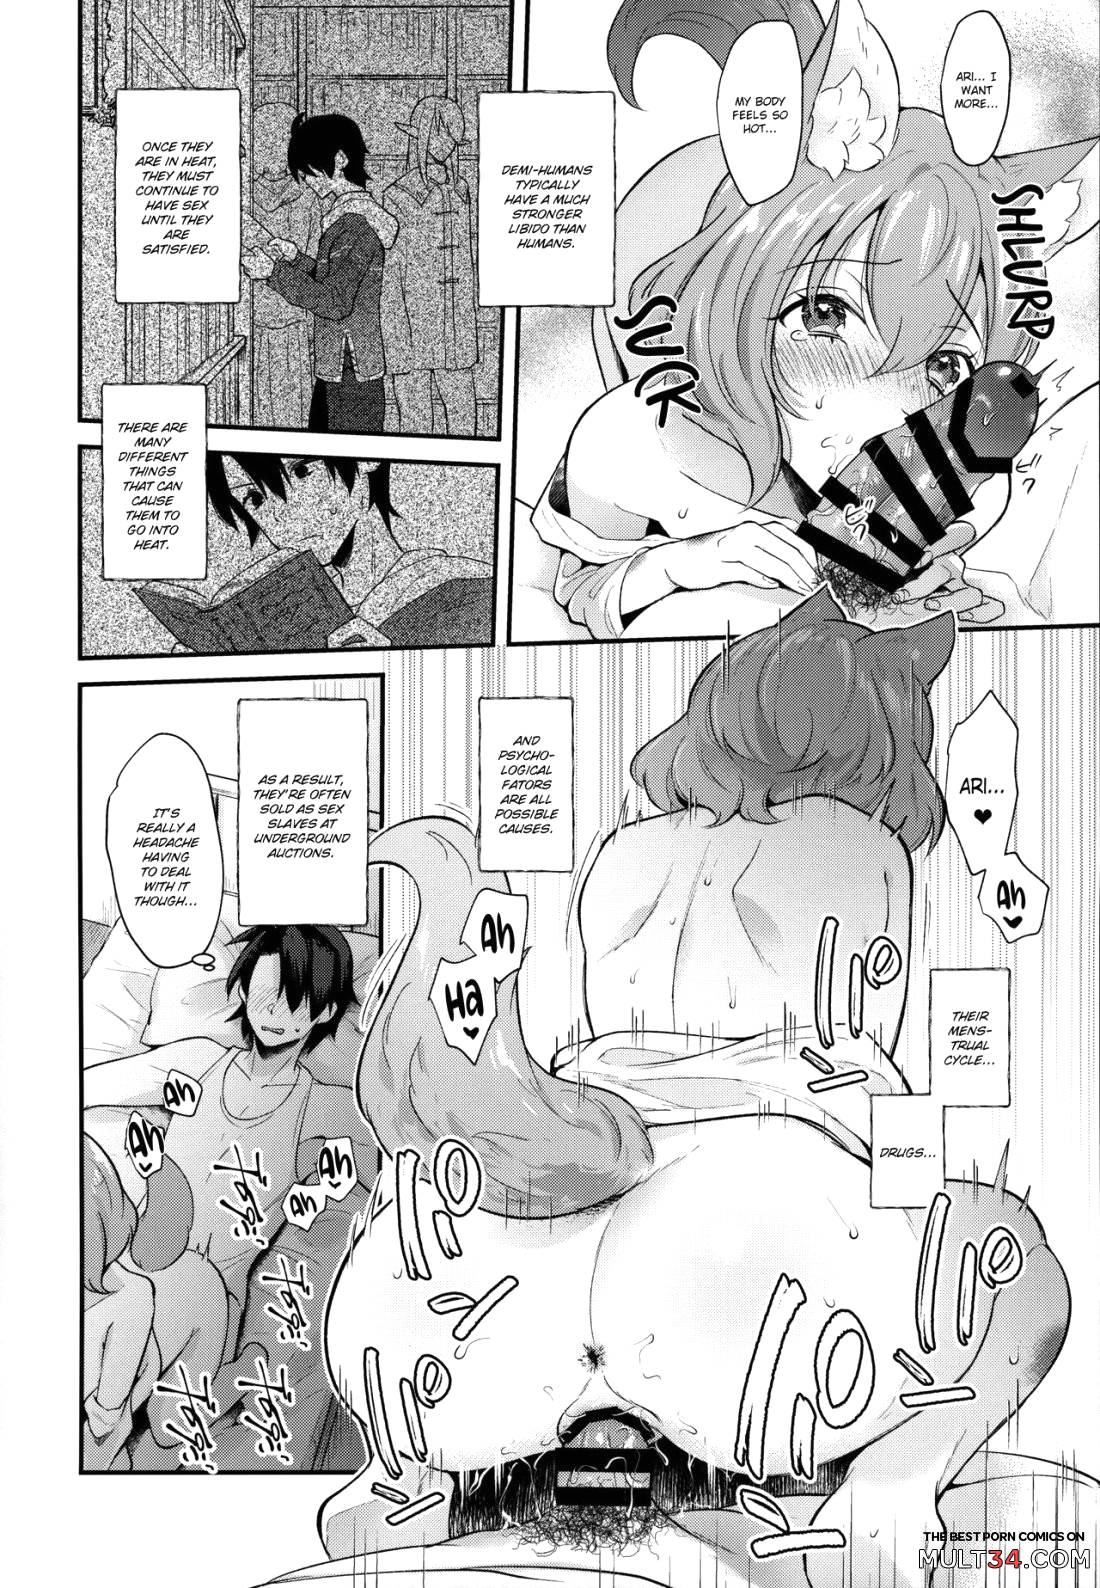 Kimi to Issho page 8